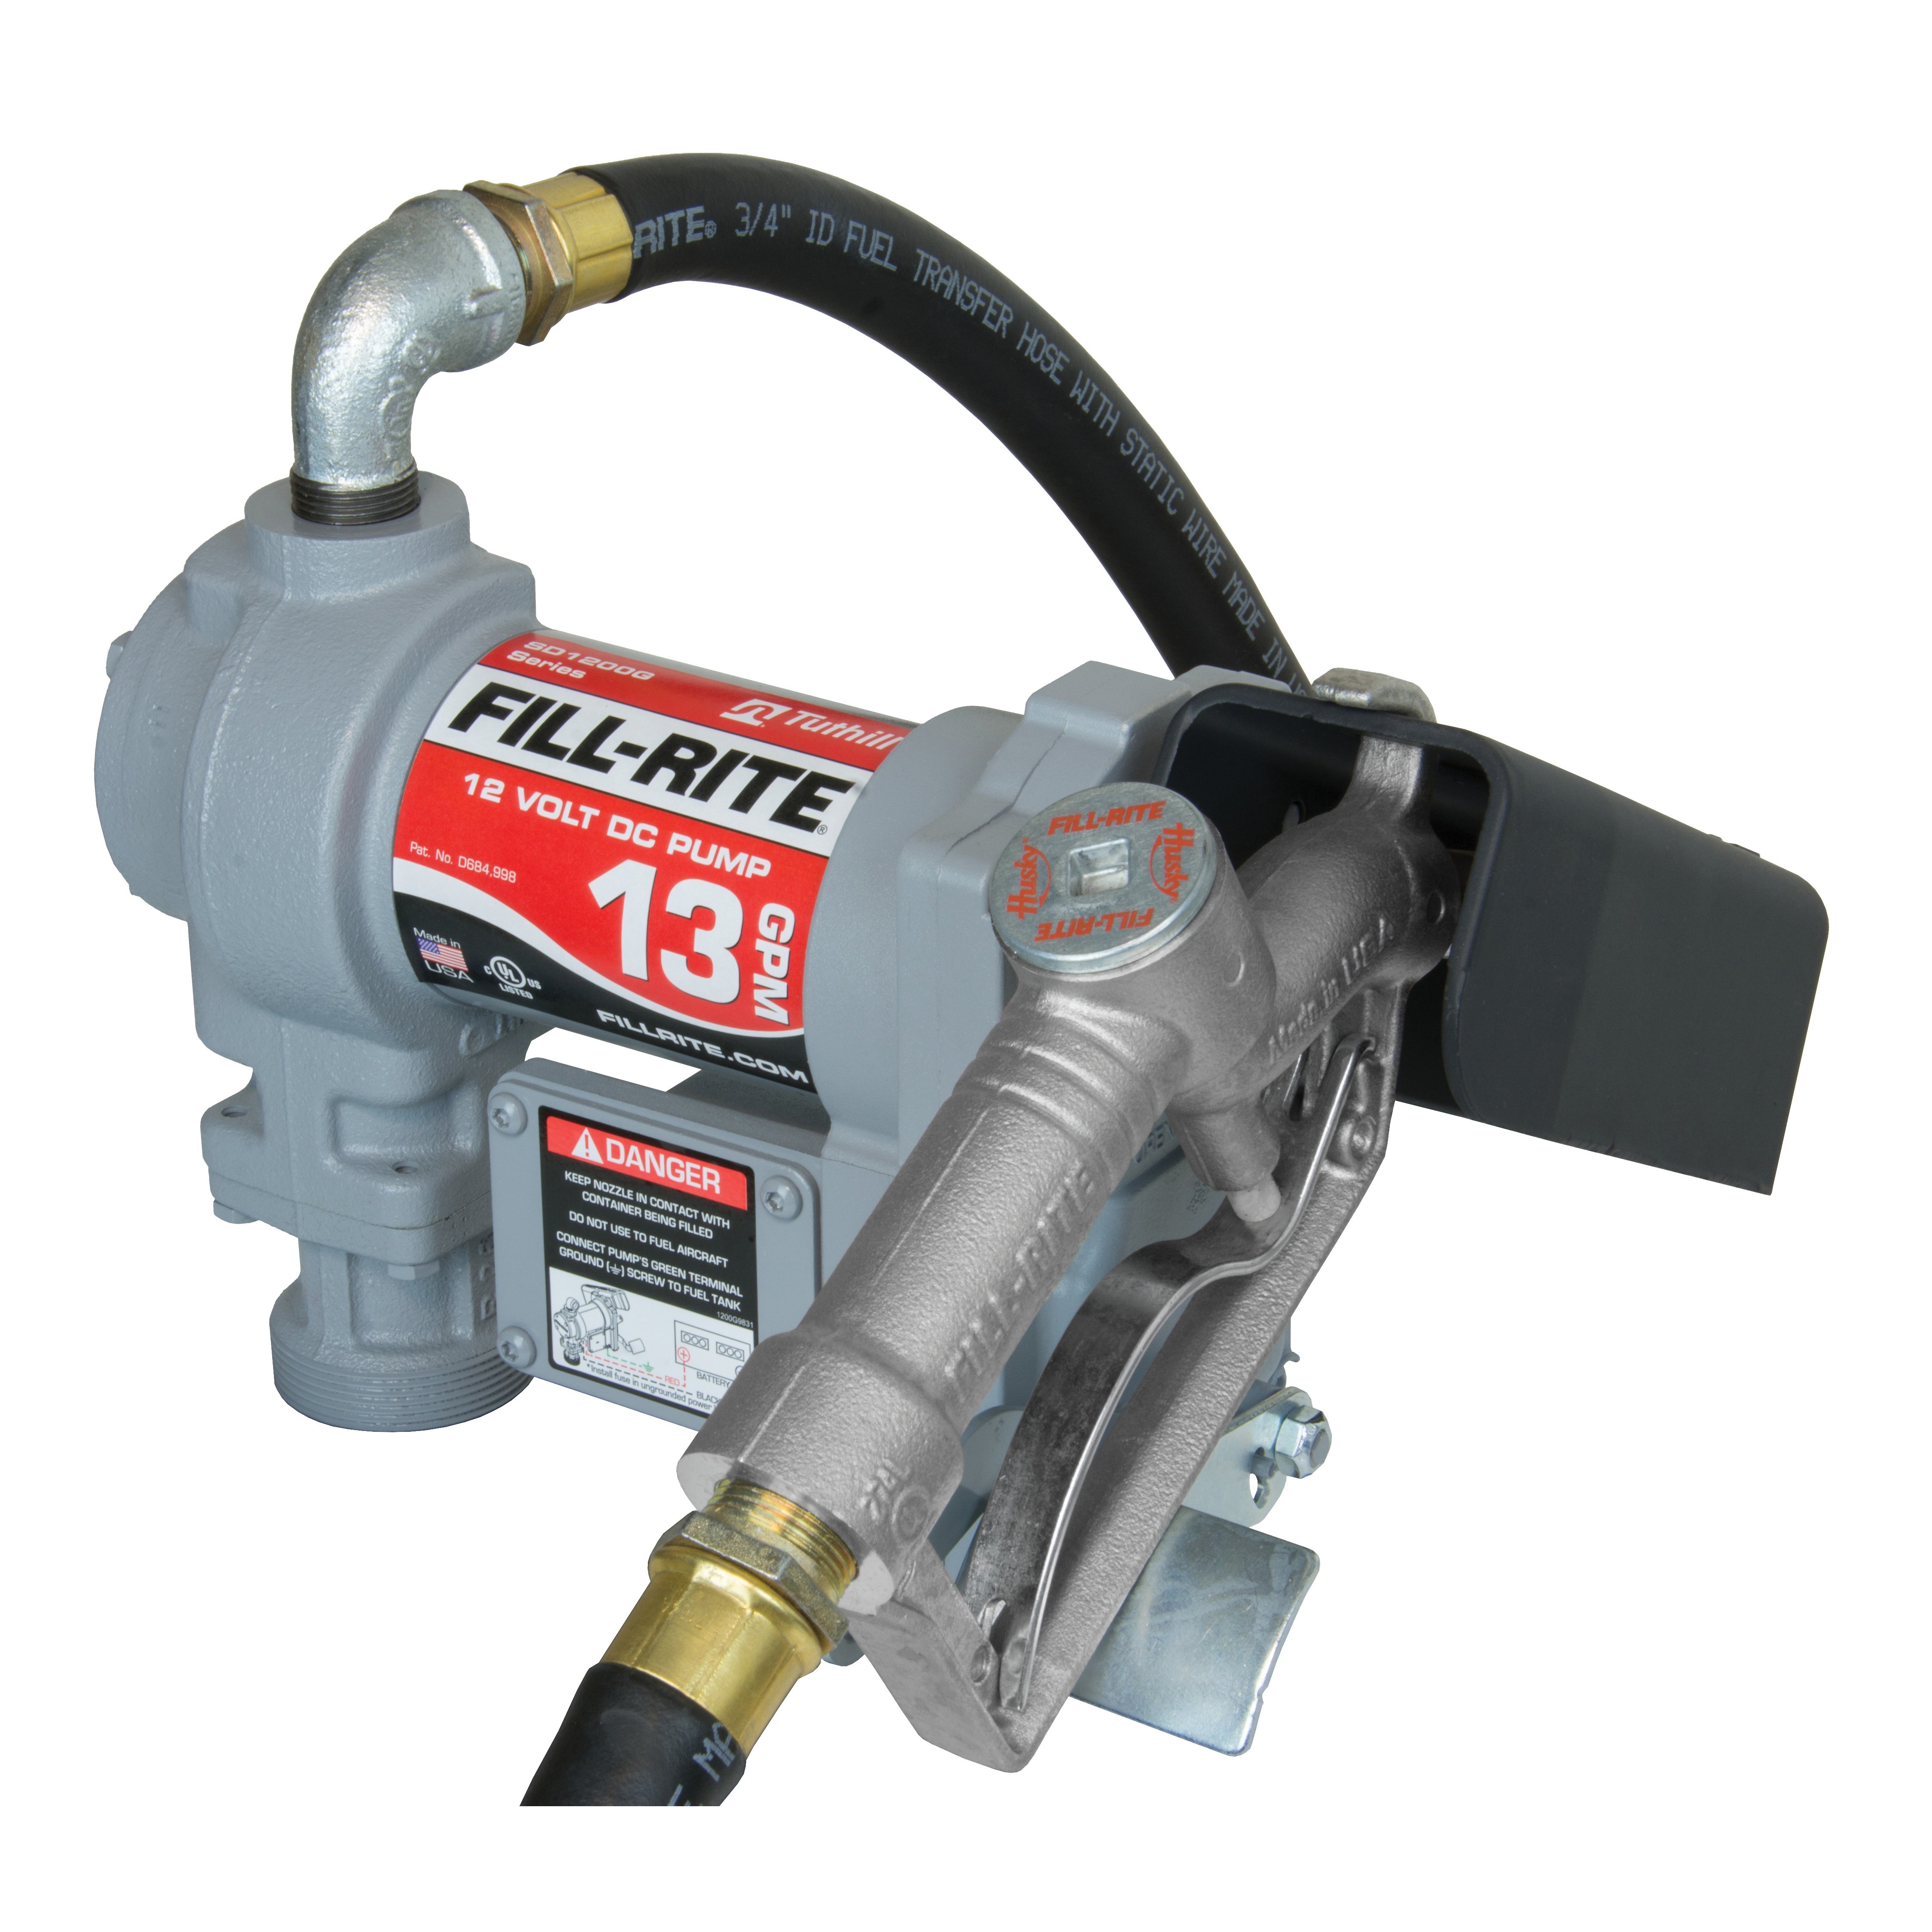 SD1202G/SD1202 Fuel Transfer Pump, Motor: 1/4 hp, 12 VDC, 20 A, 30 min Duty Cycle, 3/4 in Outlet, 13 gpm